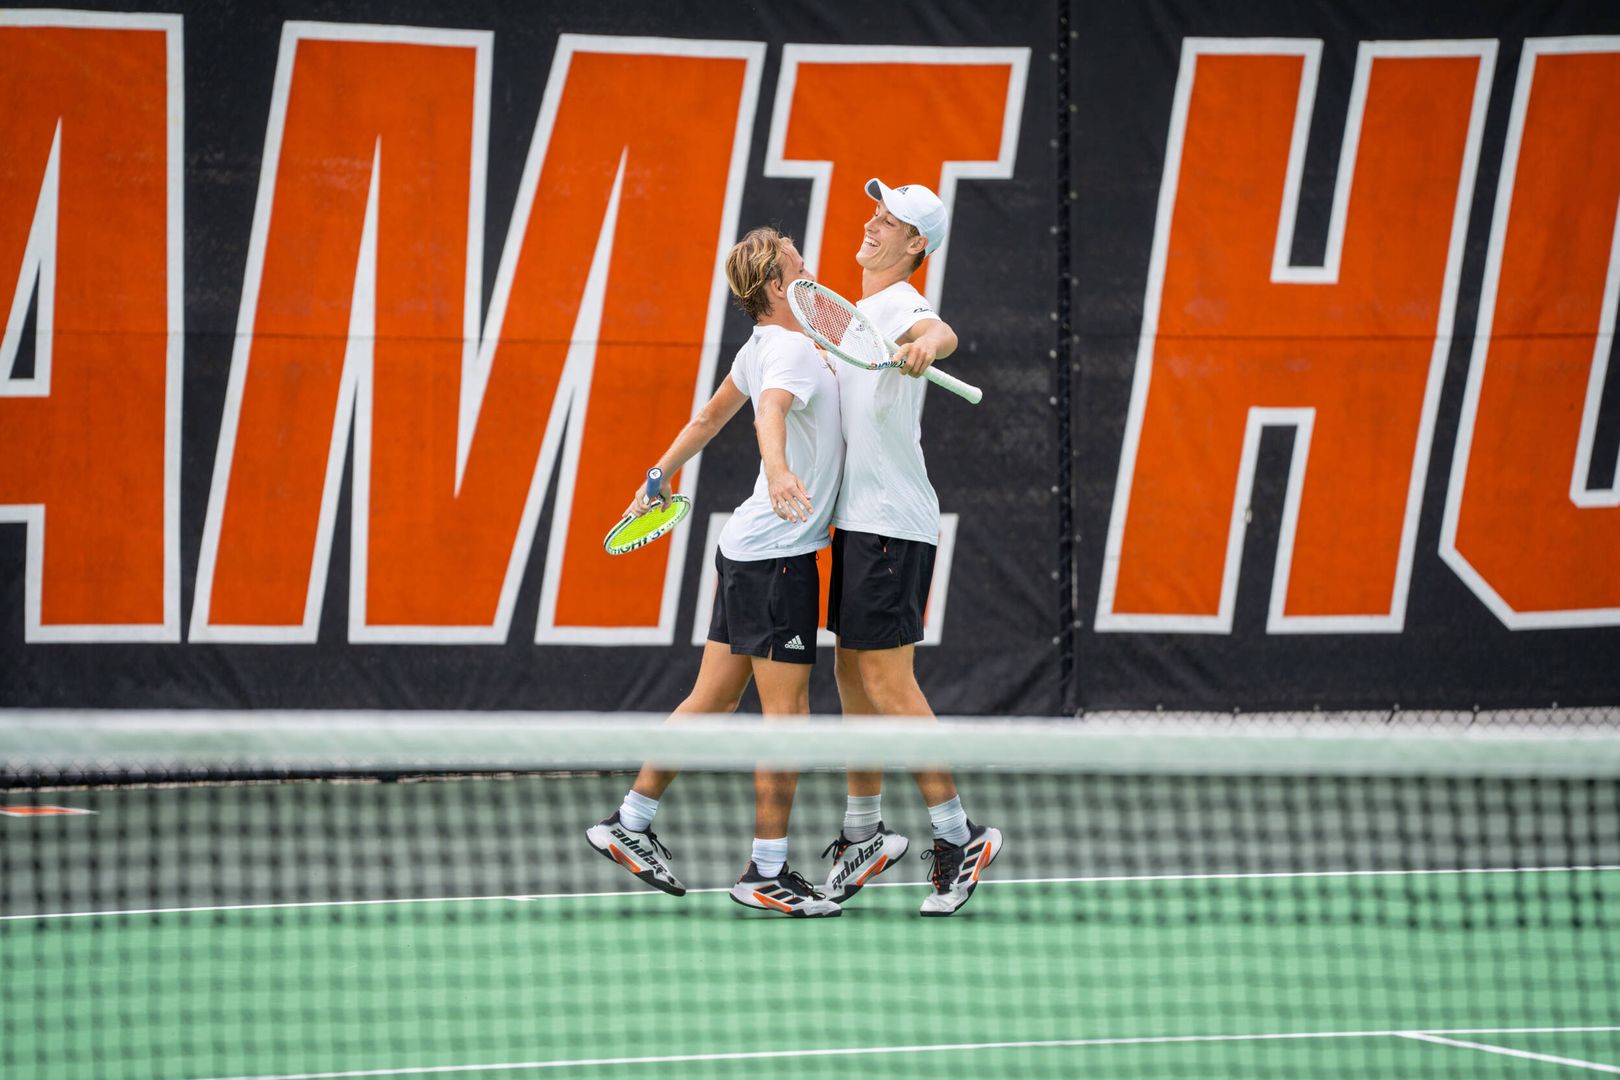 Miami Defeats Drexel for Third Straight Win